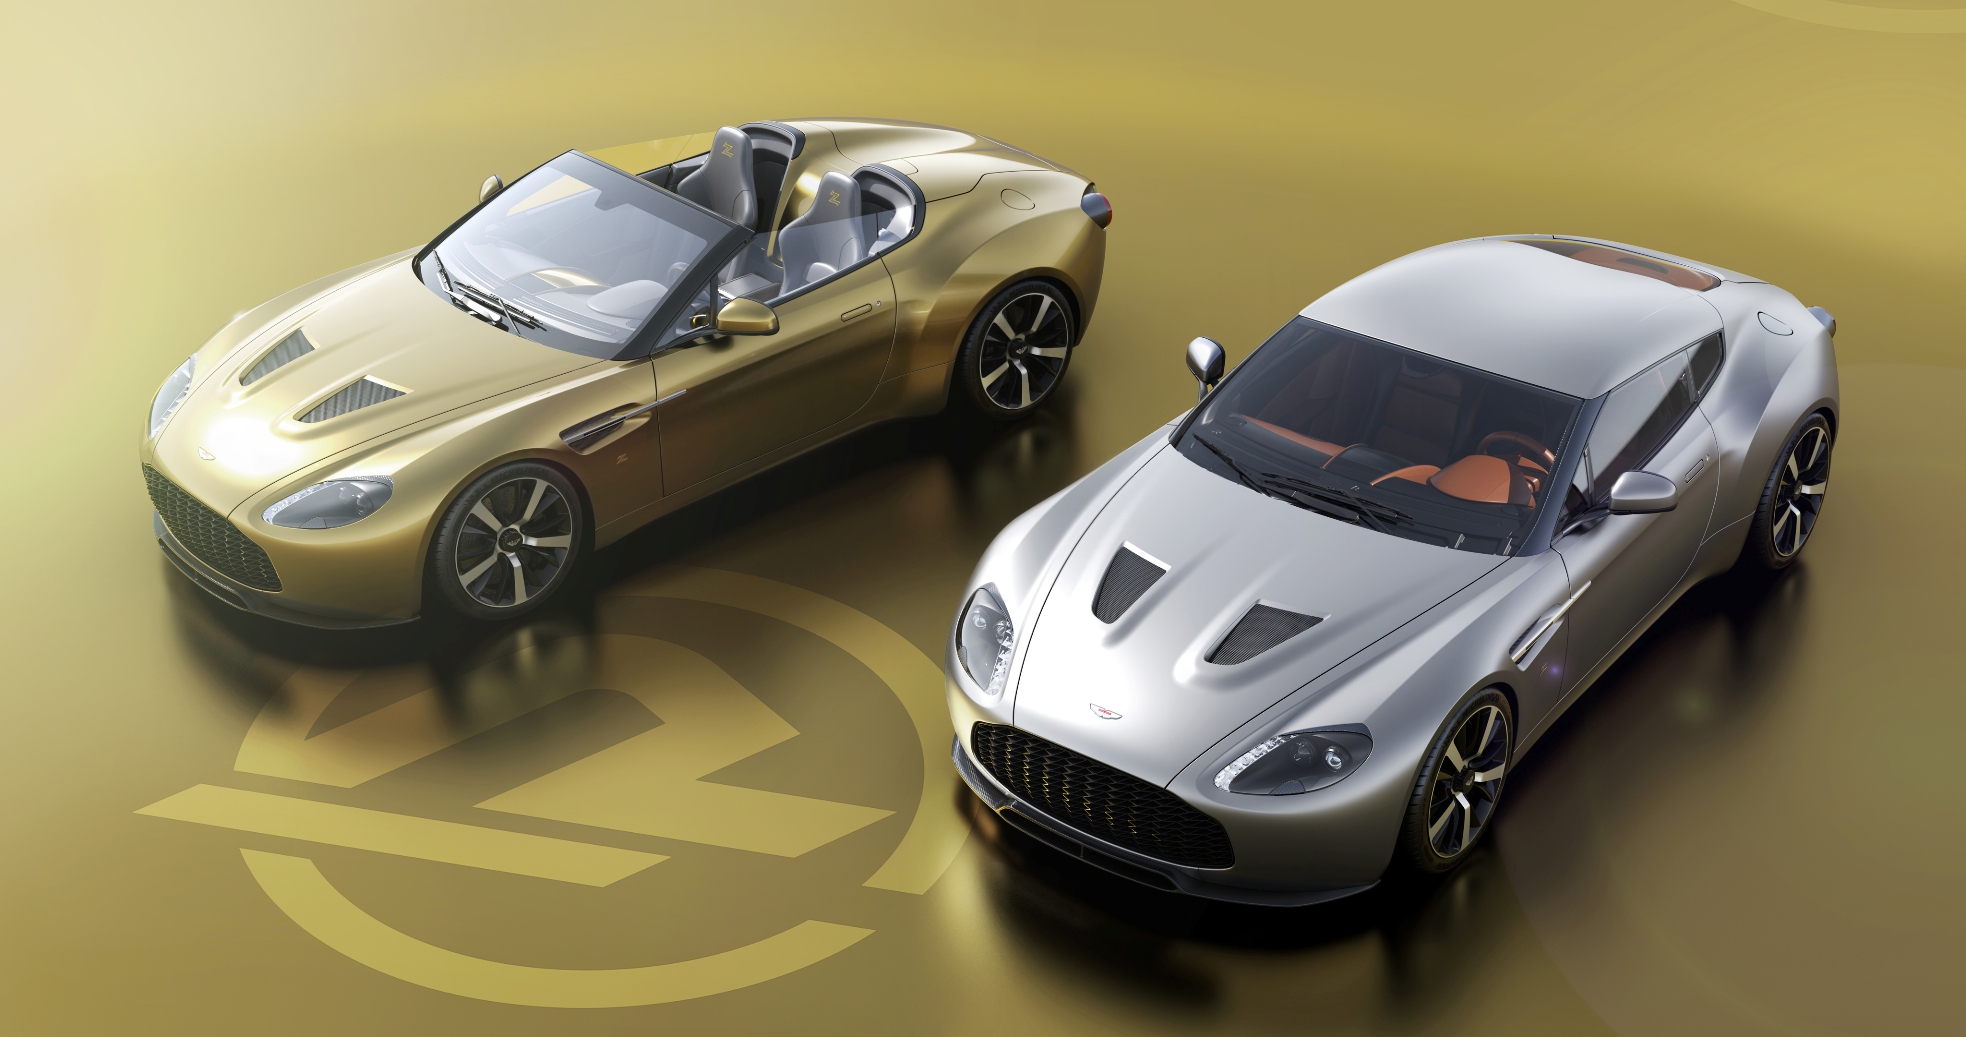 Production of Aston Martin Vantage V12 Zagato Heritage TWINS to Take Place at R-Reforged’s New UK Facility in Warwick